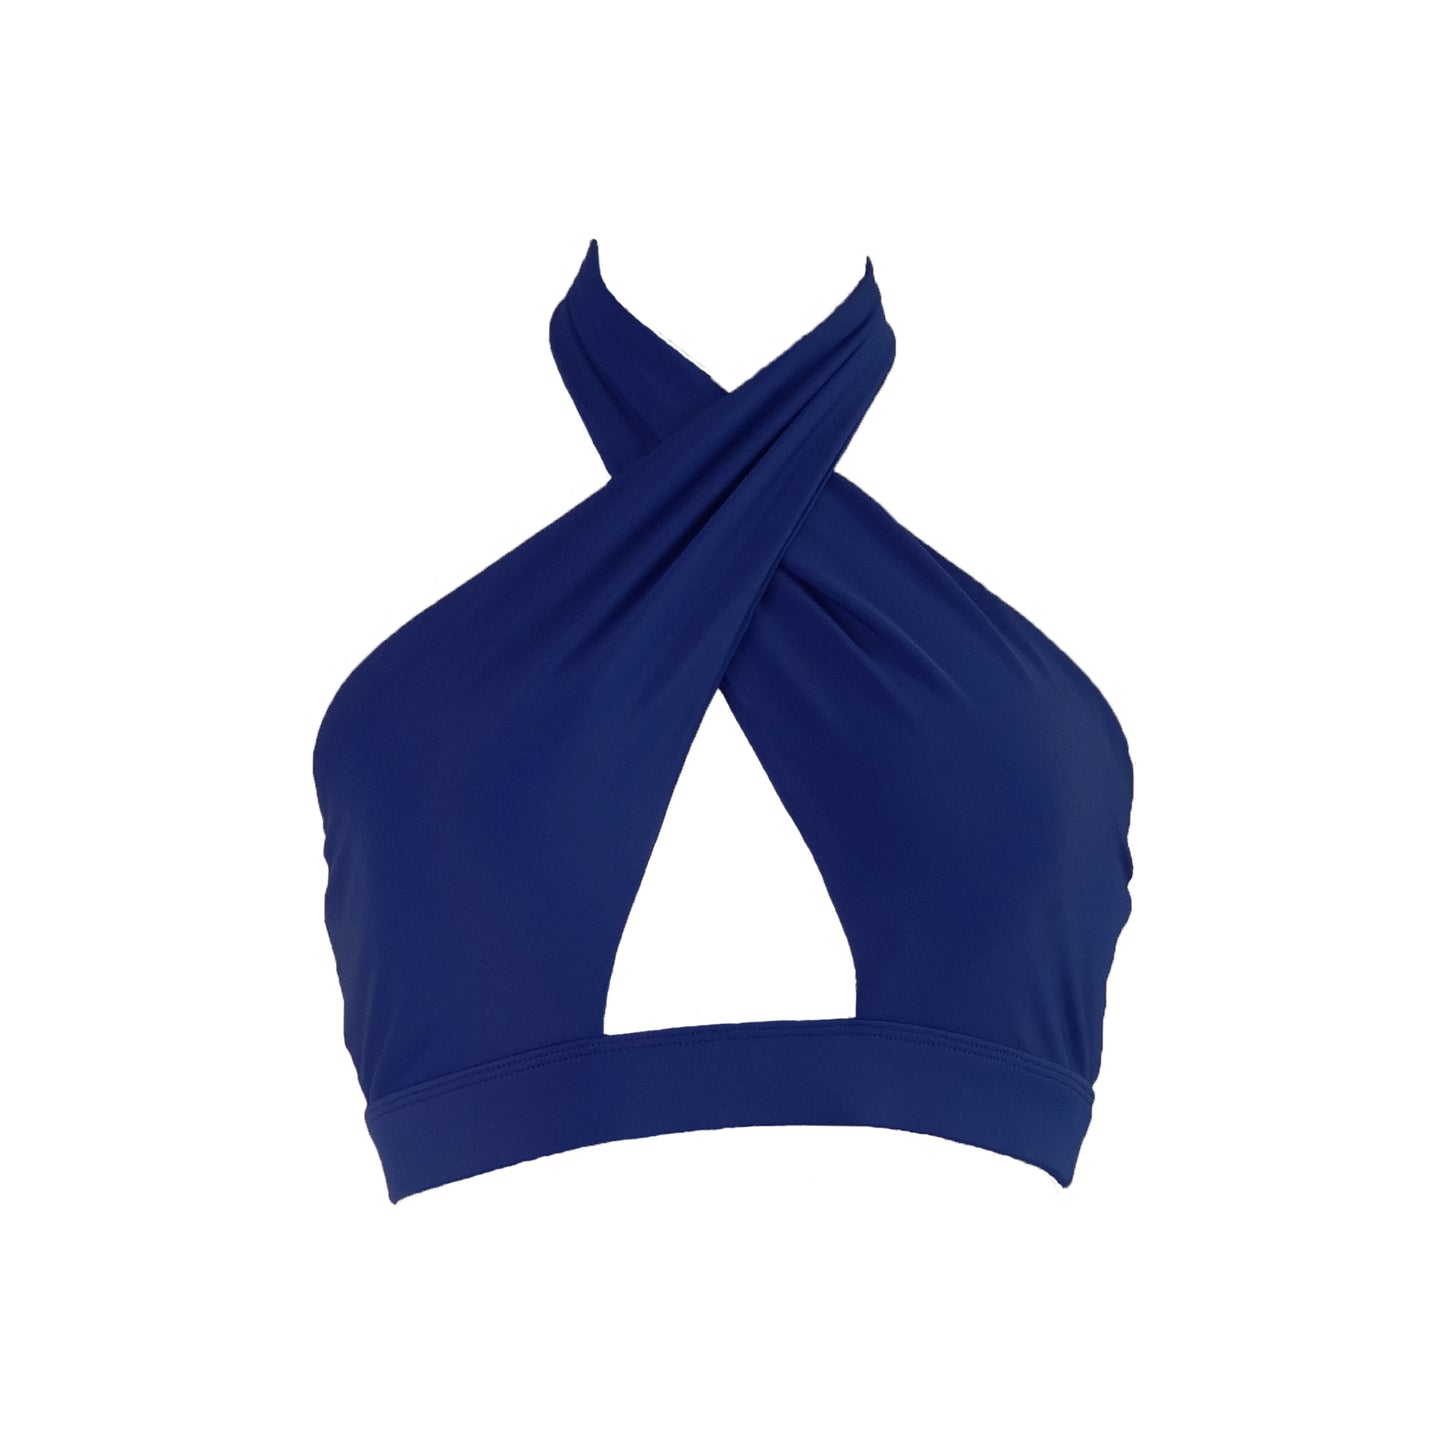 Midnight navy cross front halter bikini top with an adjustable tie neck, banded bust hem, and cut out center.